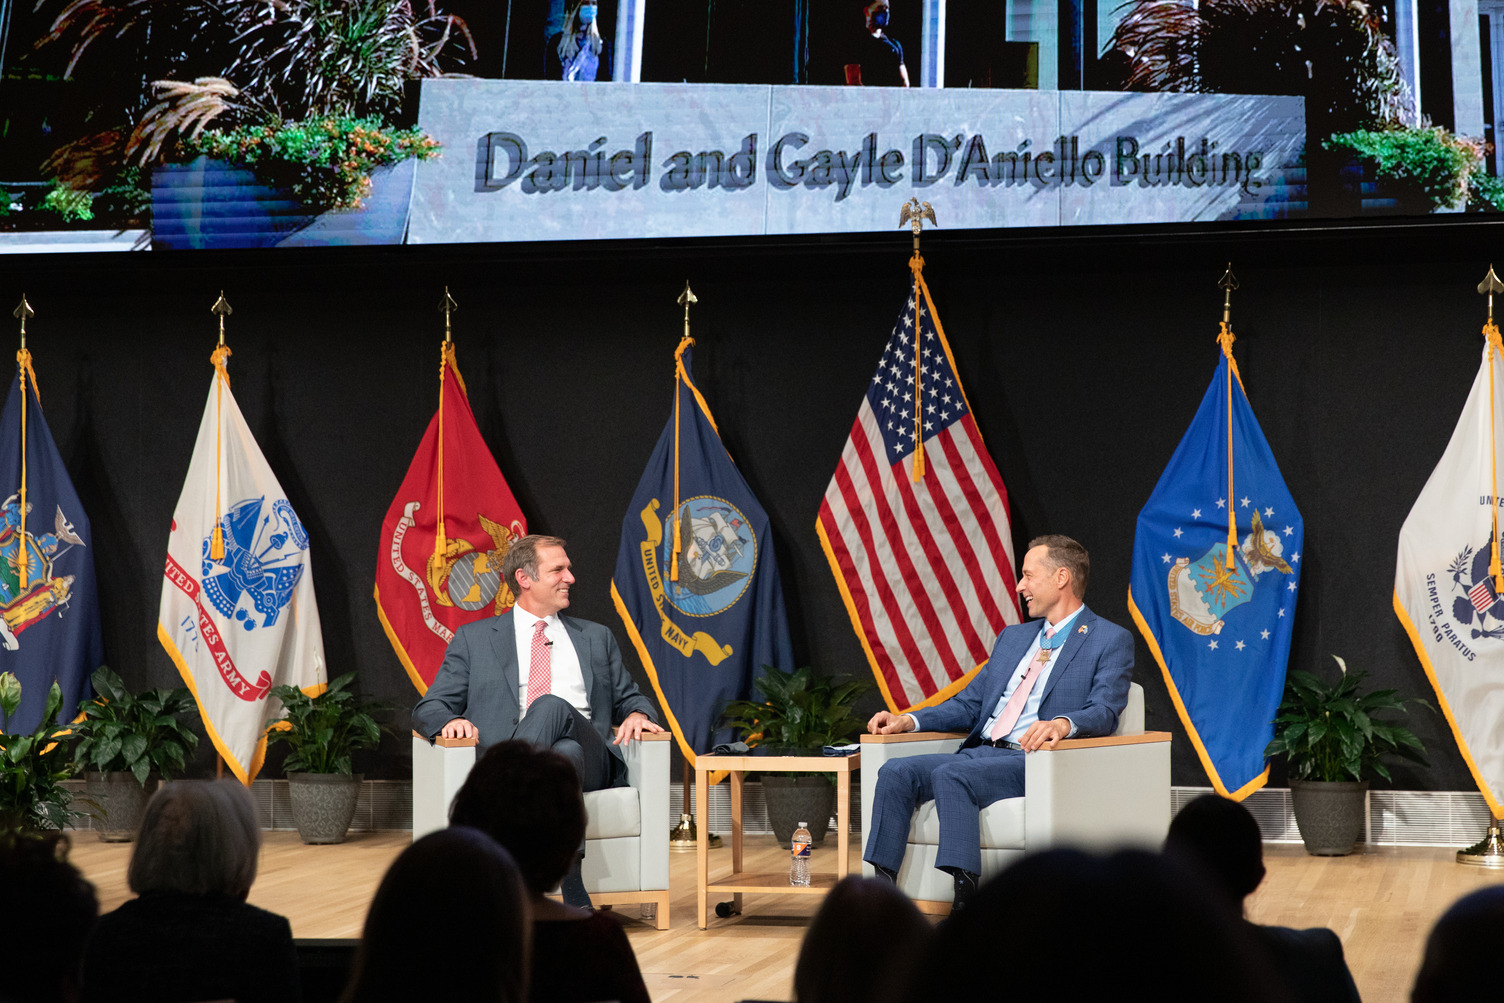 Mike Hayes and Britt Slabinski participate in a fireside chat at the dedication of the Daniel and Gayle D’Aniello Building, home of the National Veterans Resource Center